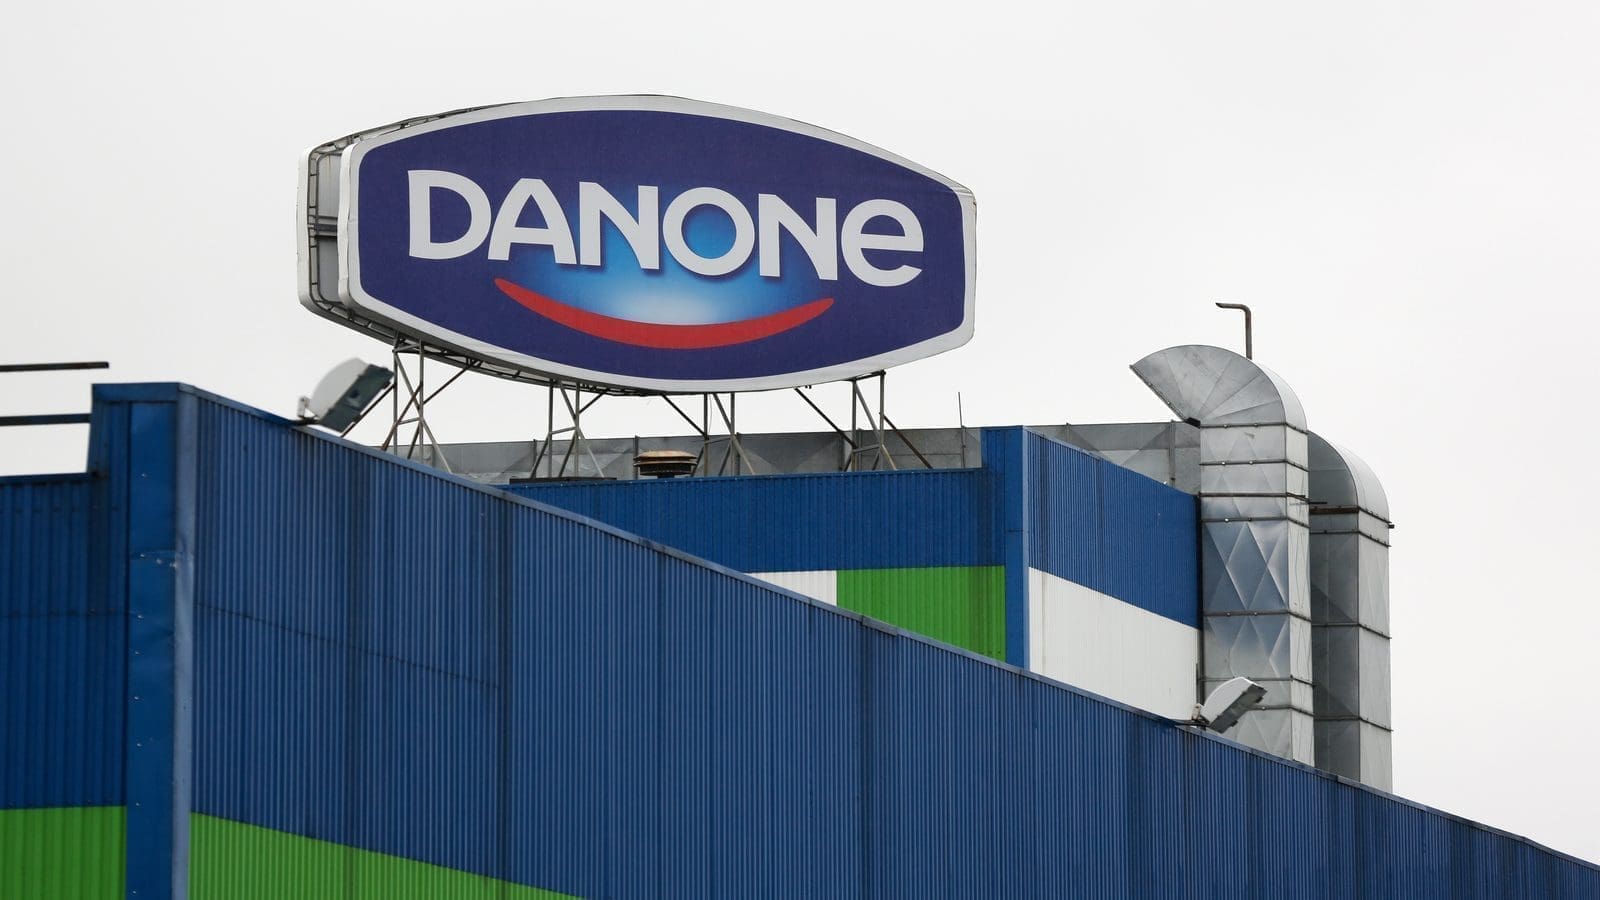 Danone sales rise in Q3 as company makes progress towards profitable growth